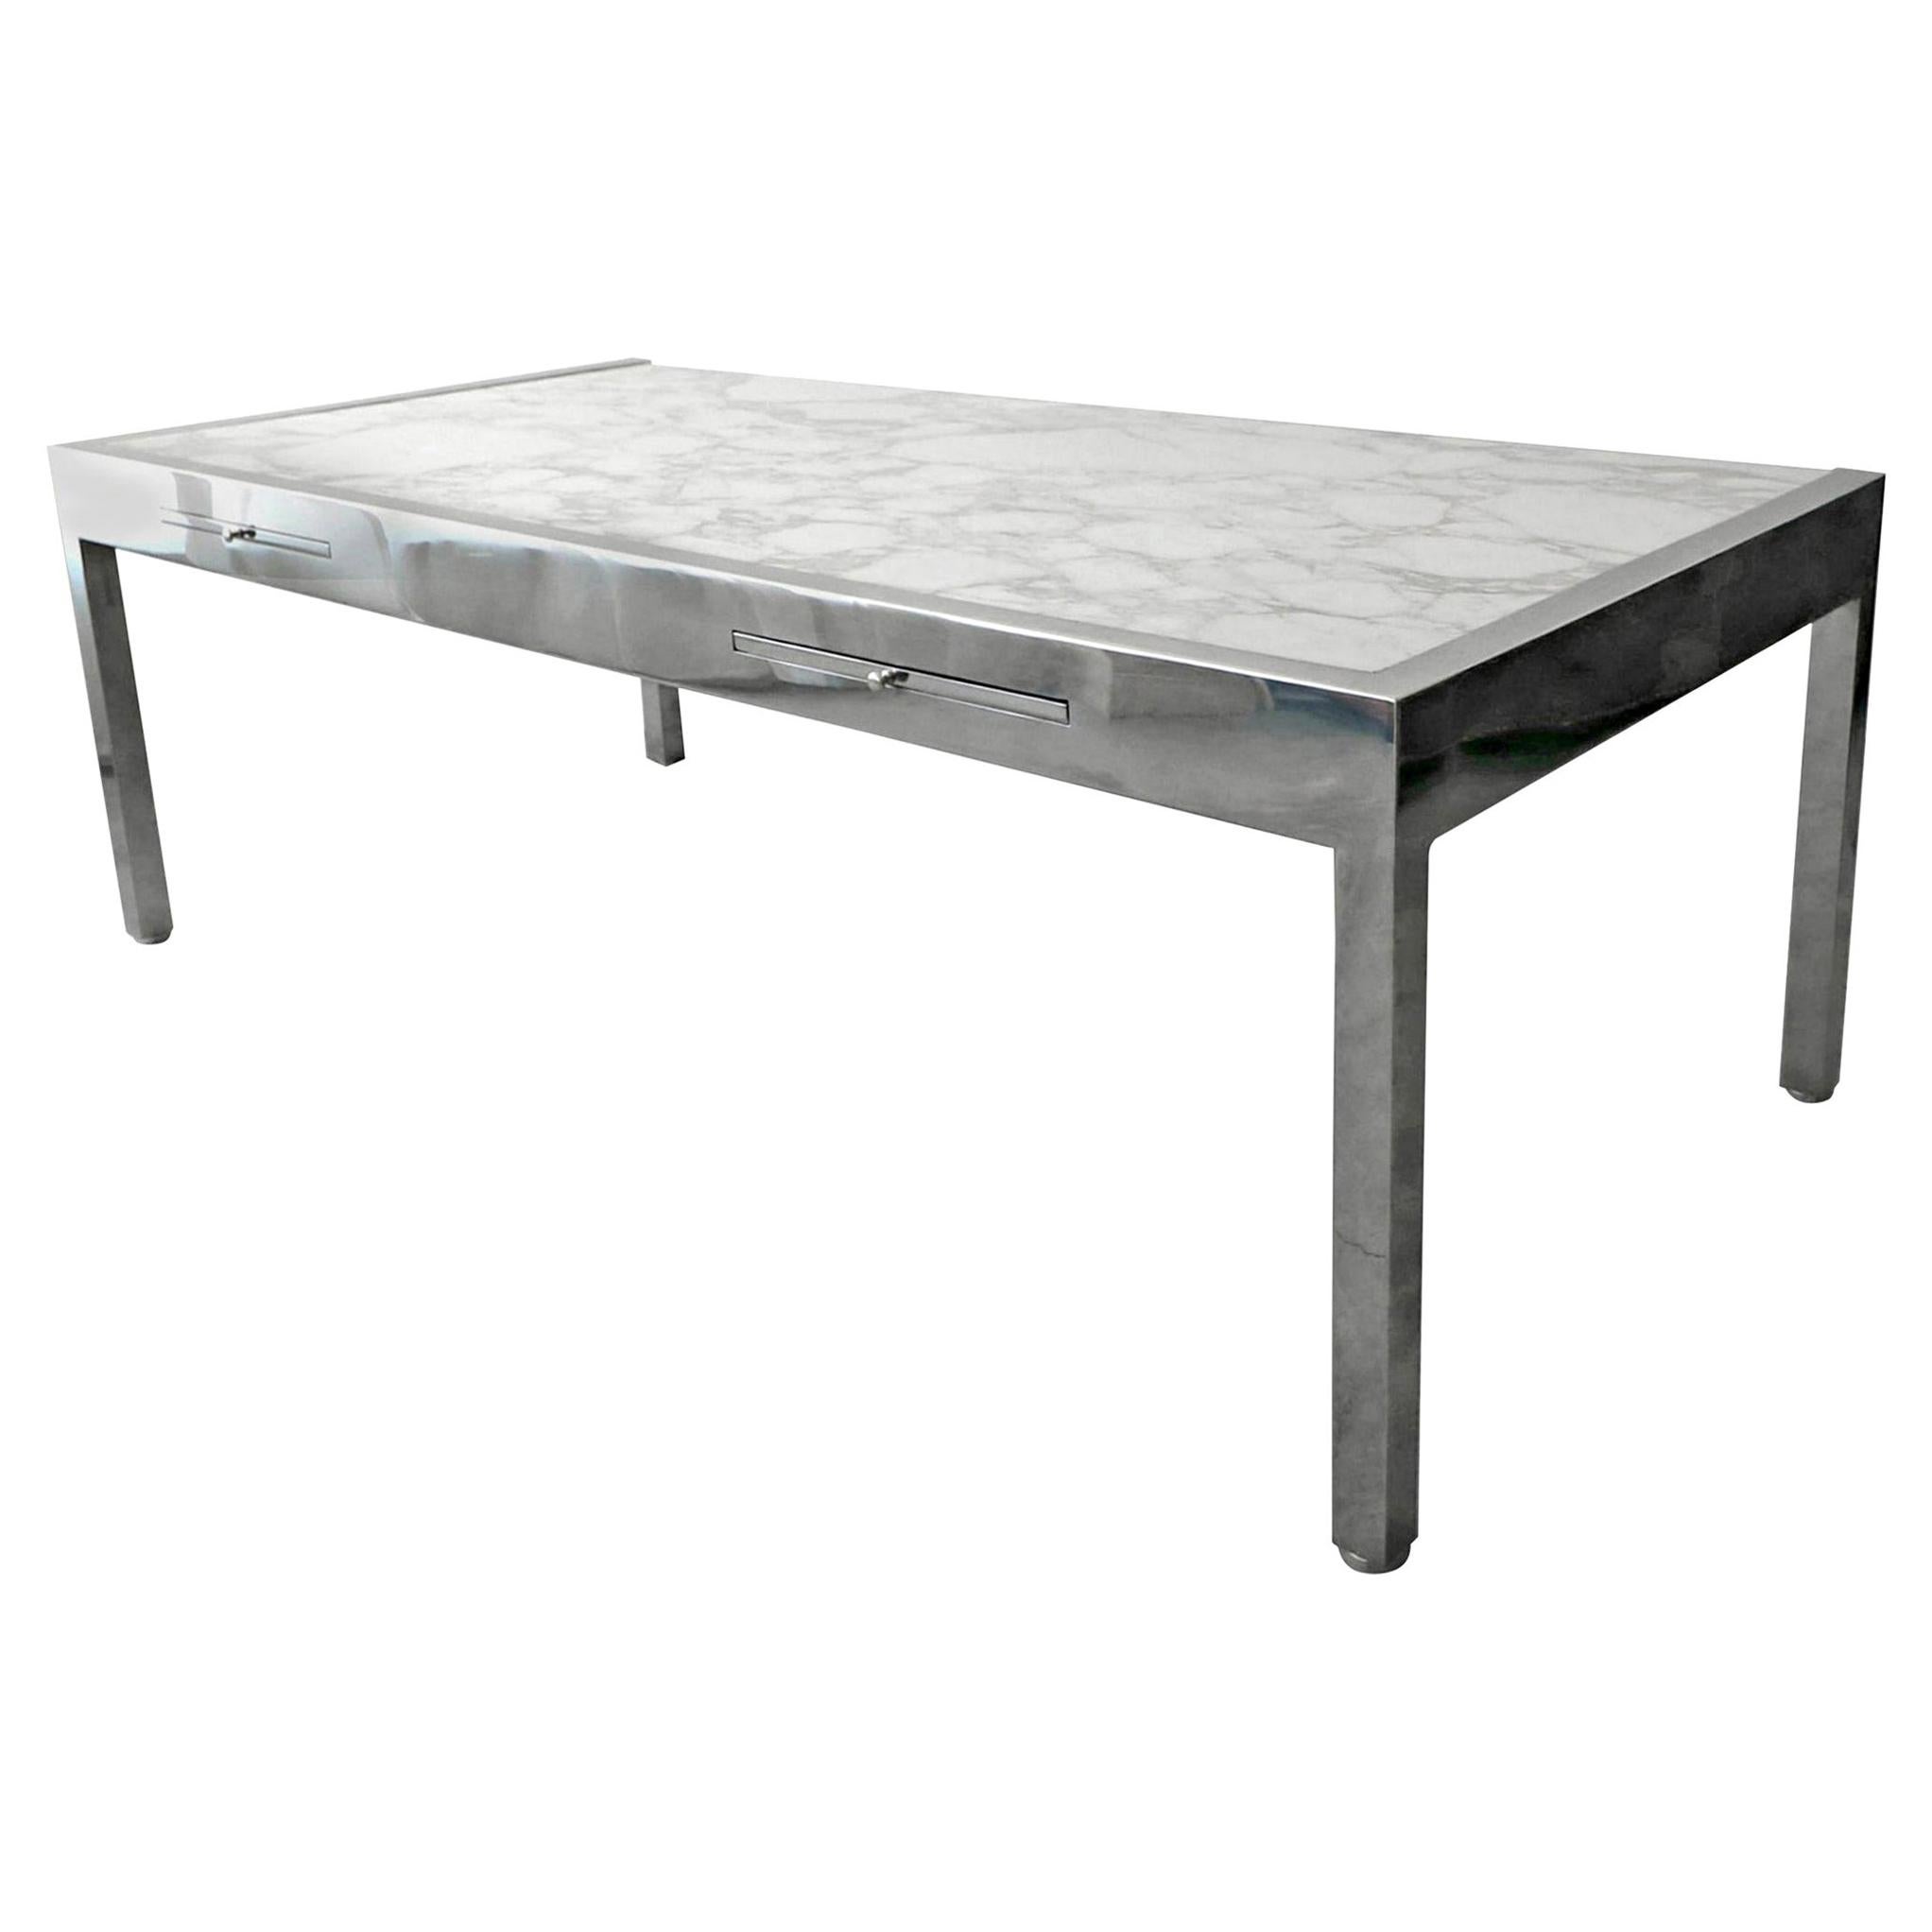 Marble and Polished Stainless Steel Executive Desk by Pace